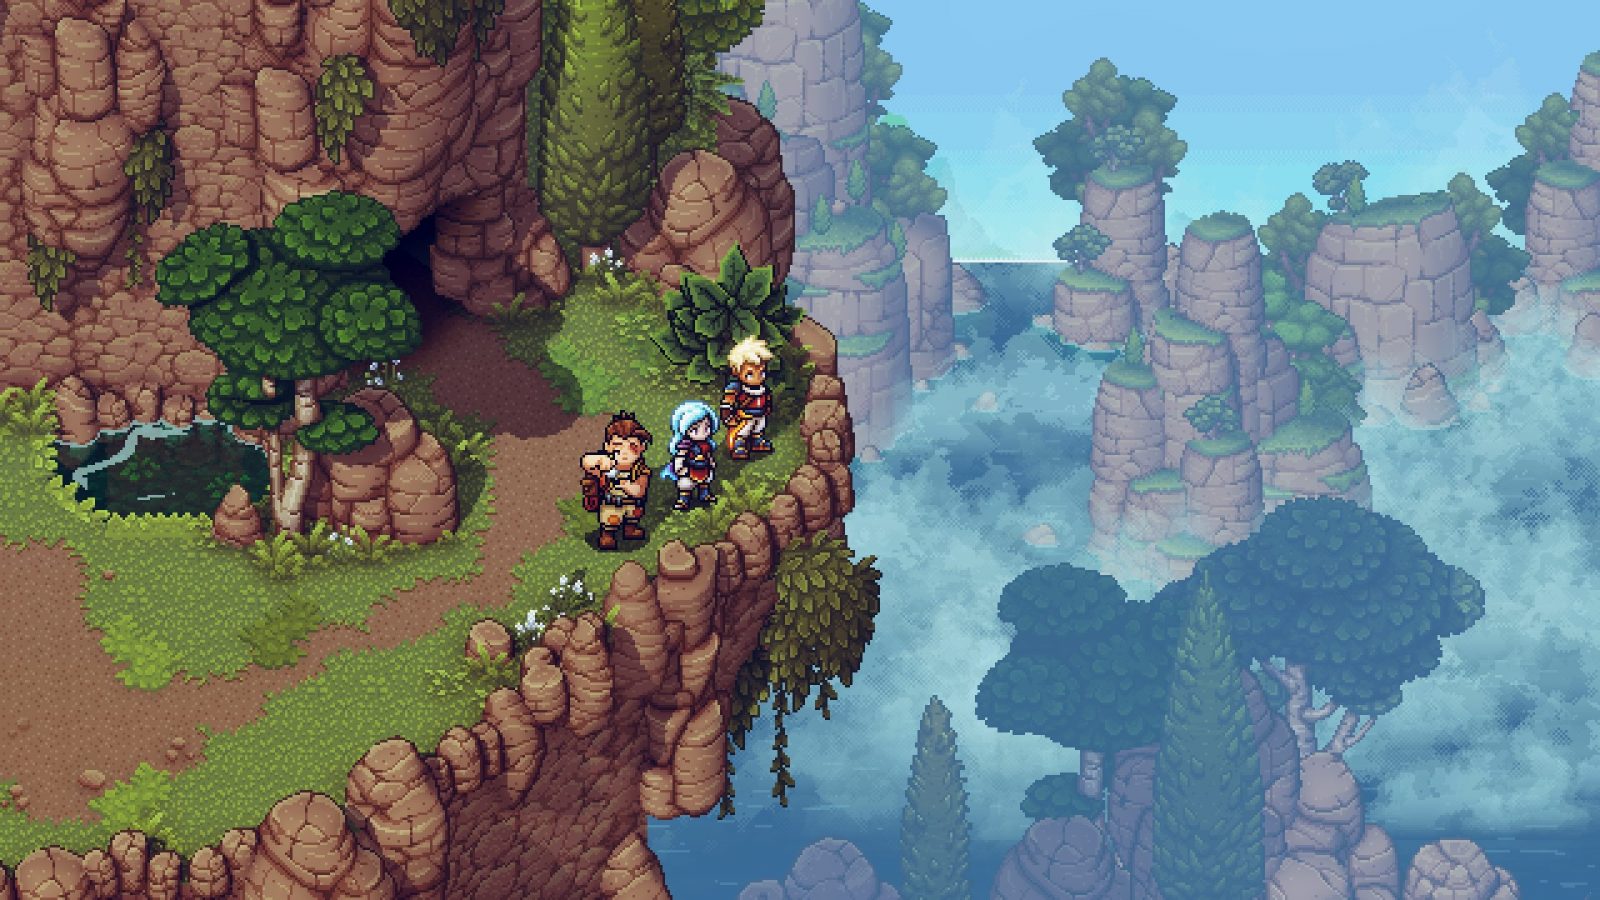 Sea of Stars, a retro inspired turn-based RPG from Sabotage Studios, releases trailer - TREND